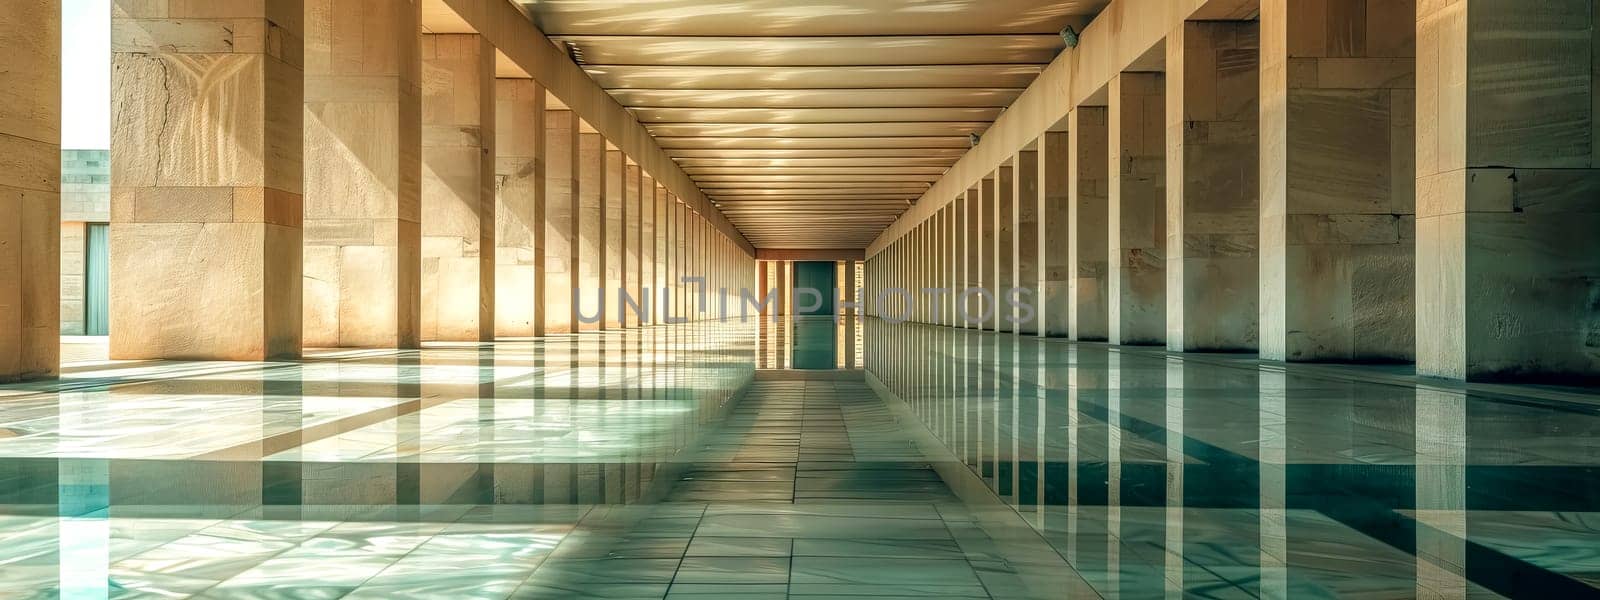 Sunlight bathes a spacious corridor with sleek pillars and reflective floor, evoking tranquility